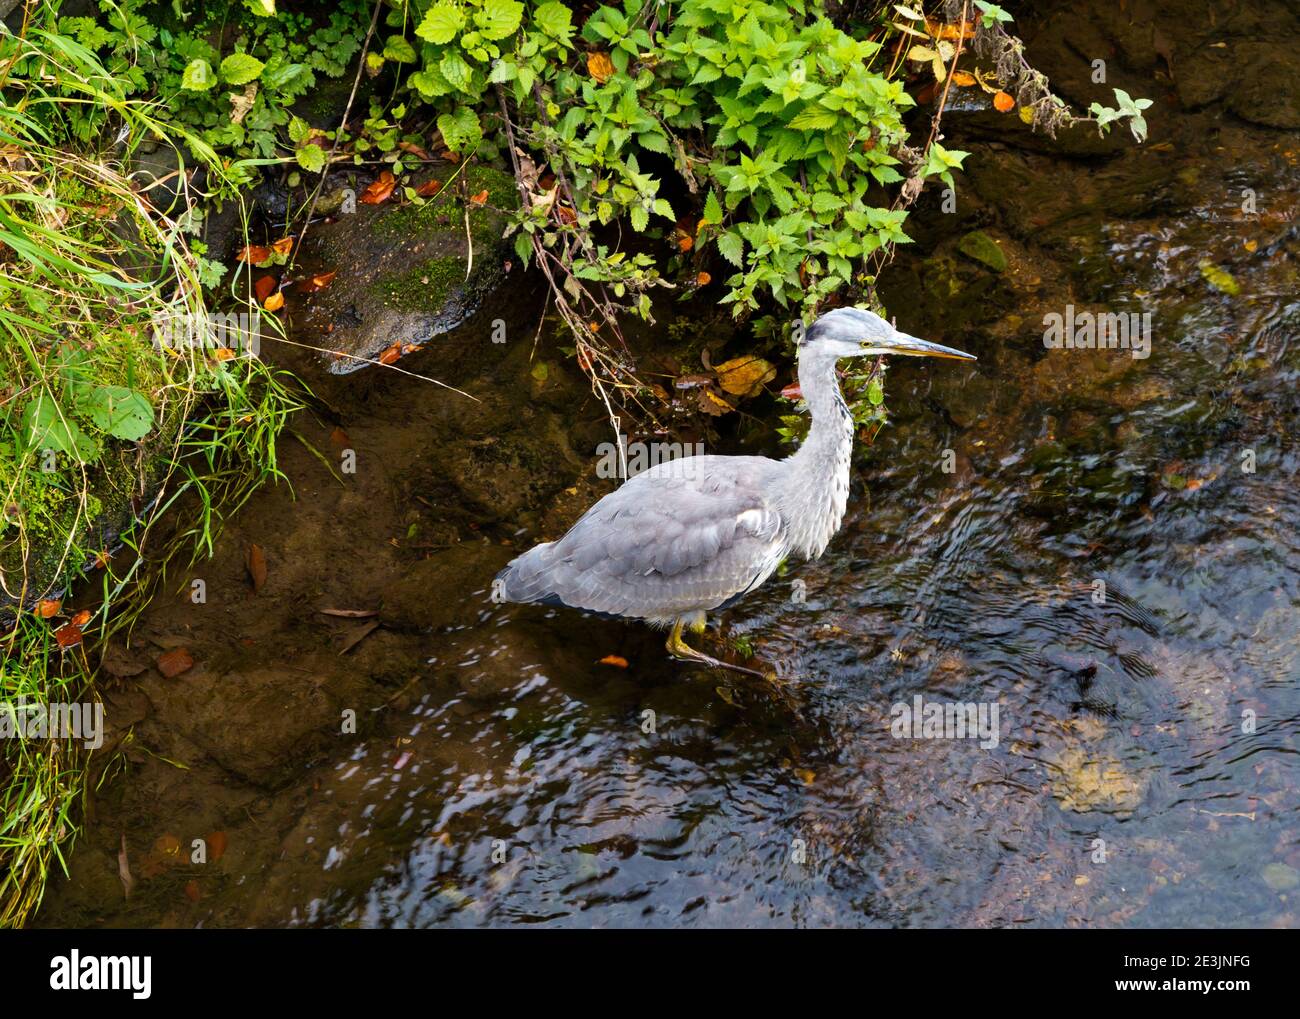 Herons a long-legged freshwater bird in the family Ardeidae wading in a stream in the Derbyshire Peak District England UK Stock Photo